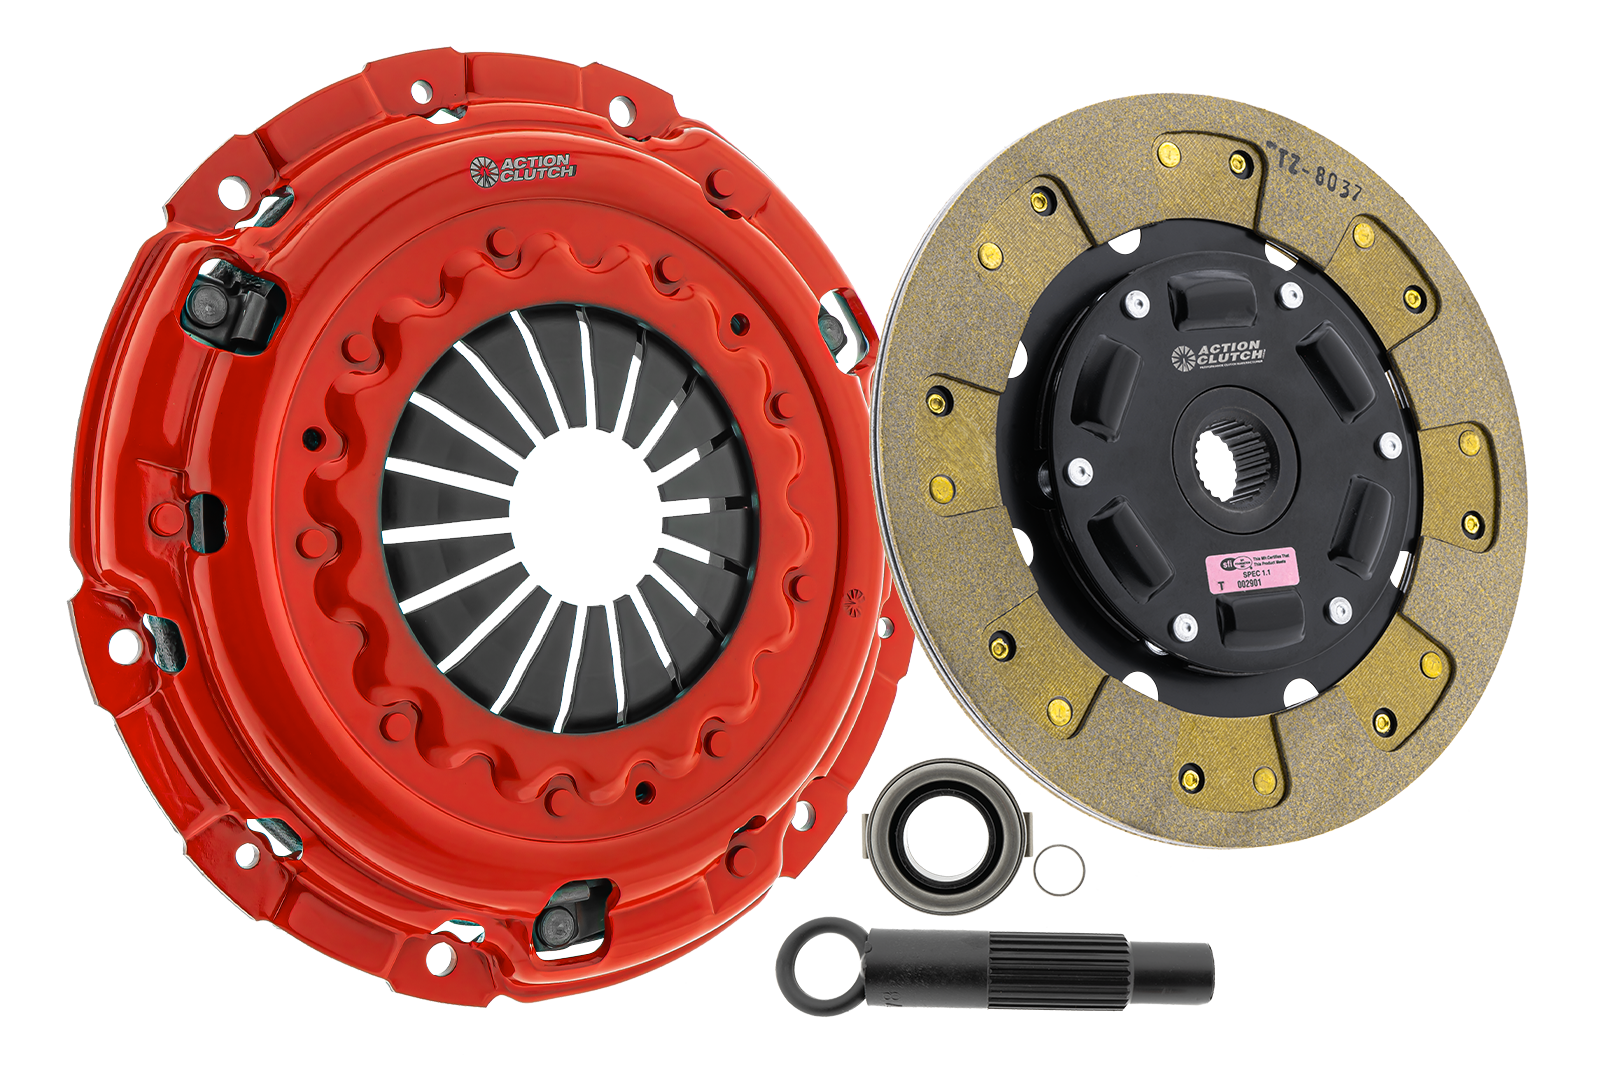 Stage 2 Clutch Kit (1KS) for Infiniti G35 2007-2008 3.5L (VQ35HR) With Heavy Duty Concentric Slave Cylinder